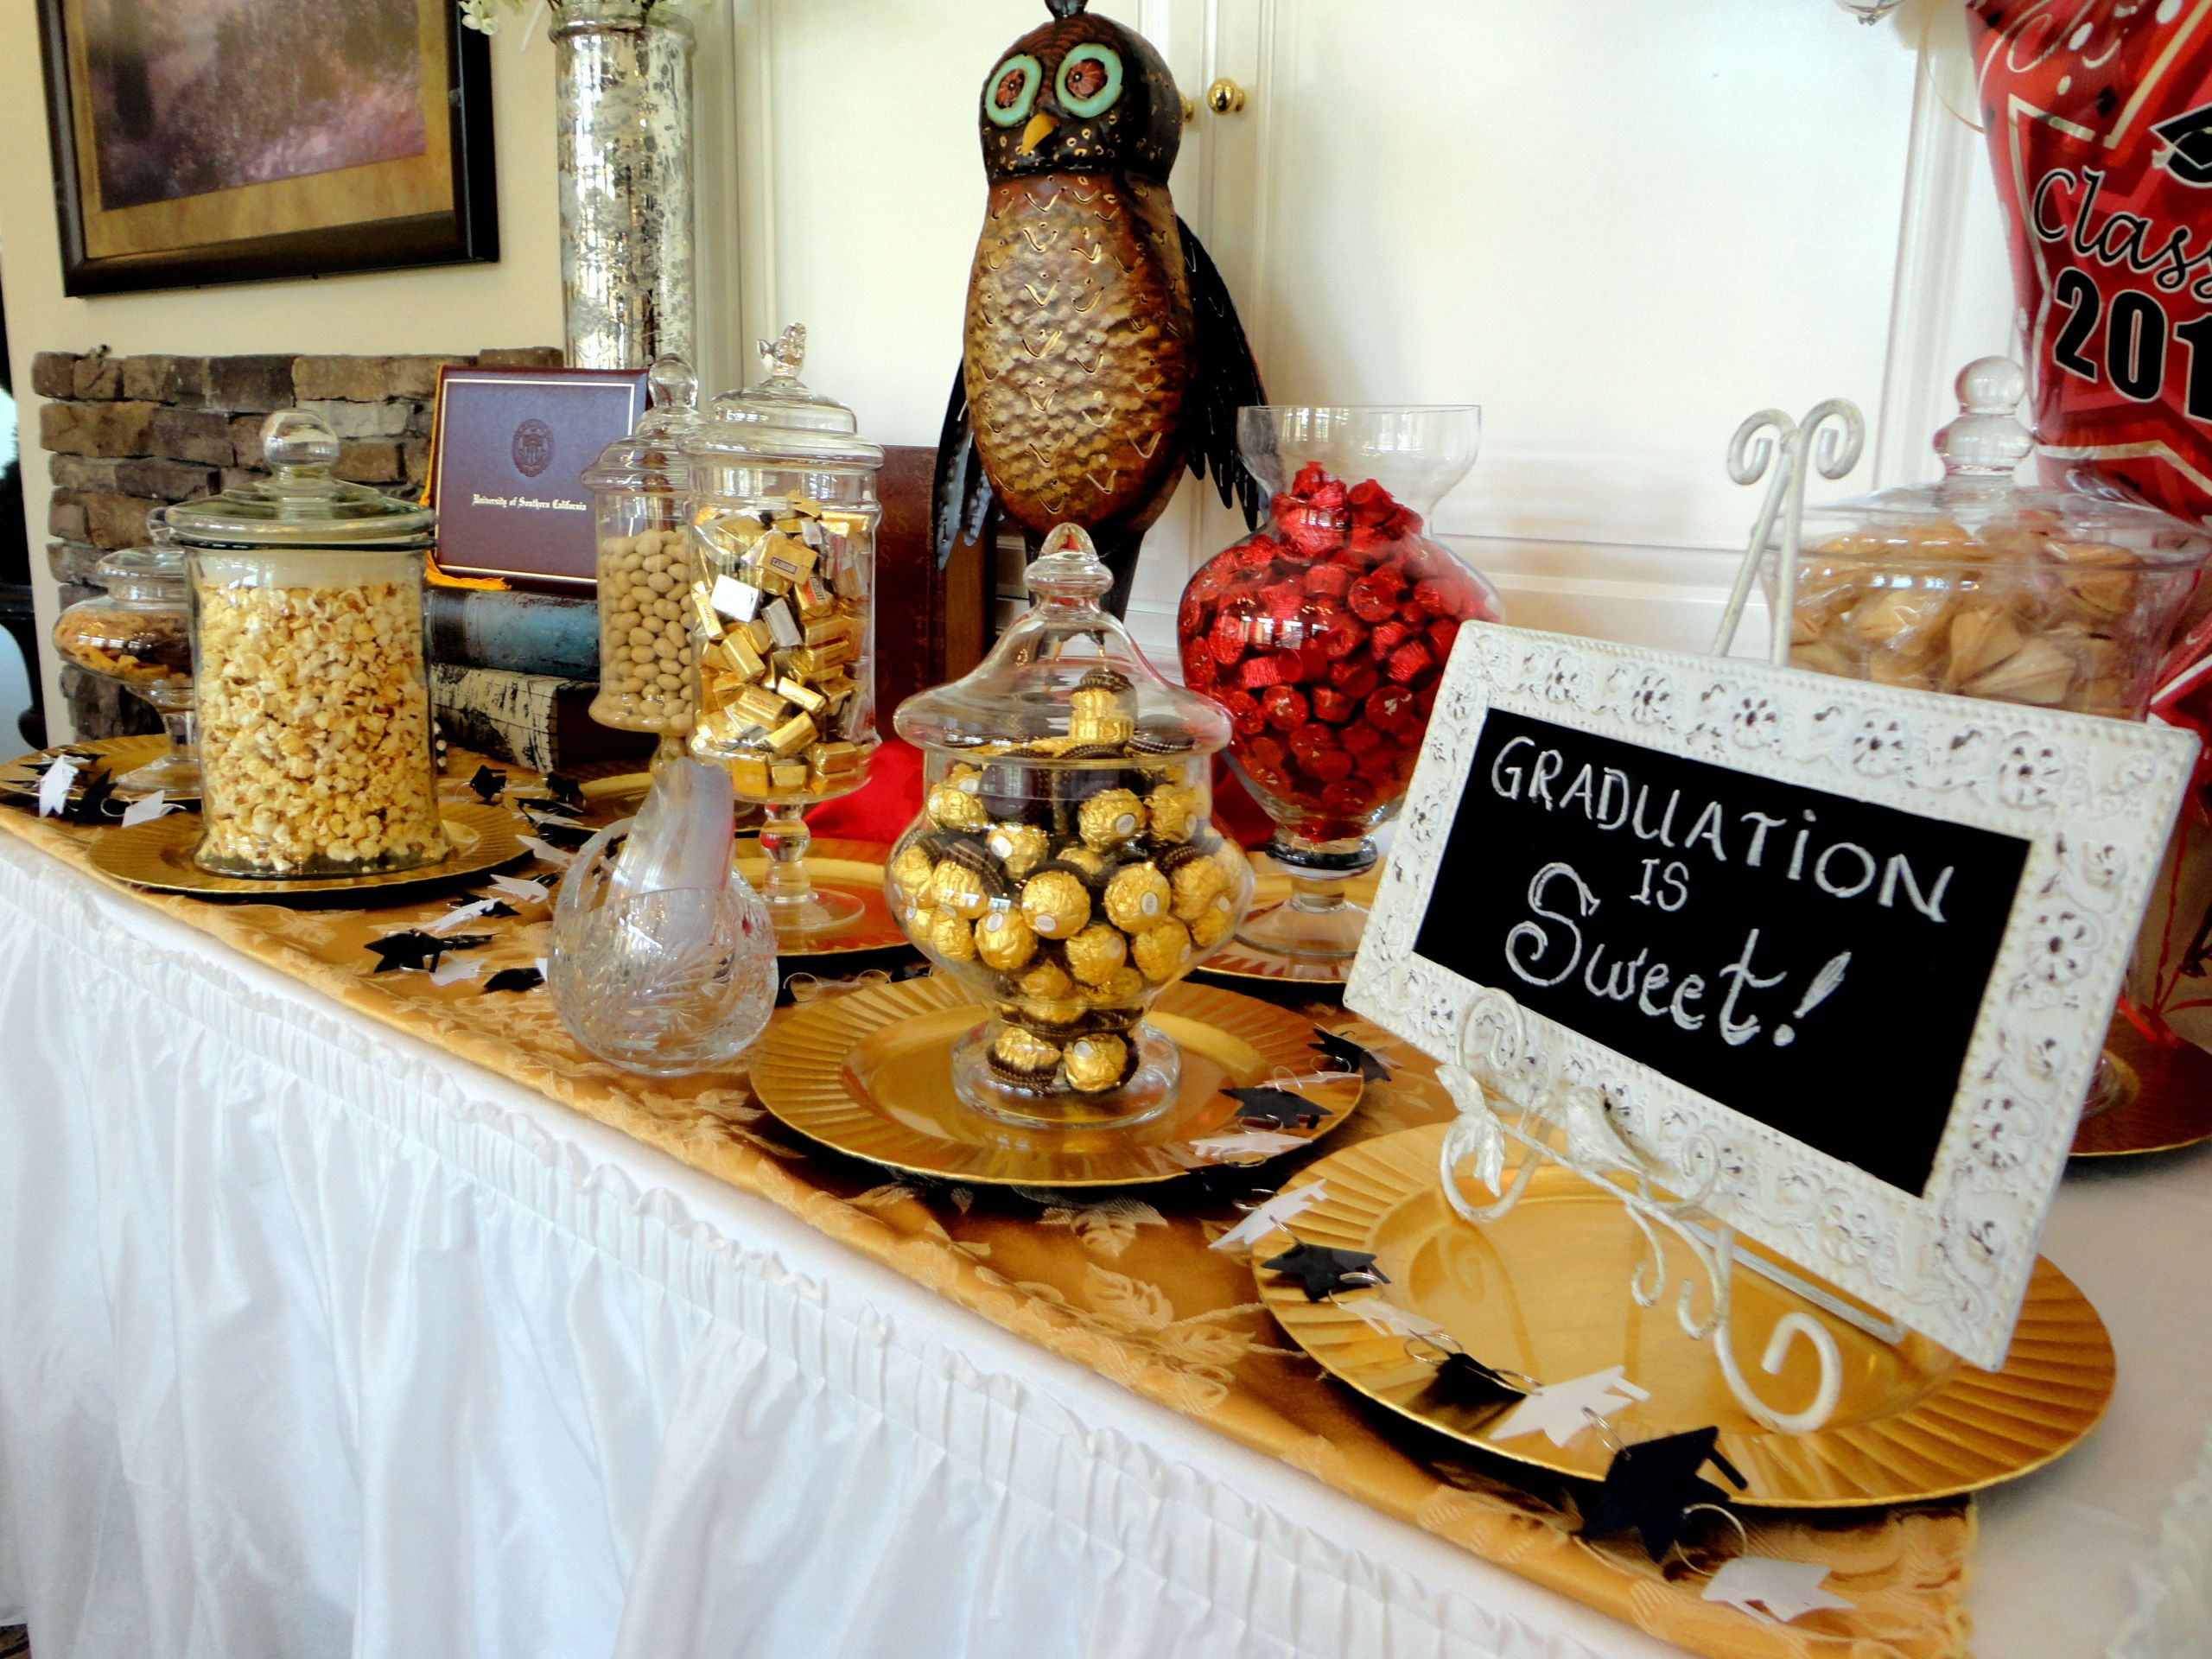 Usc Graduation Party Ideas
 Dessert table my mother created for my USC graduation